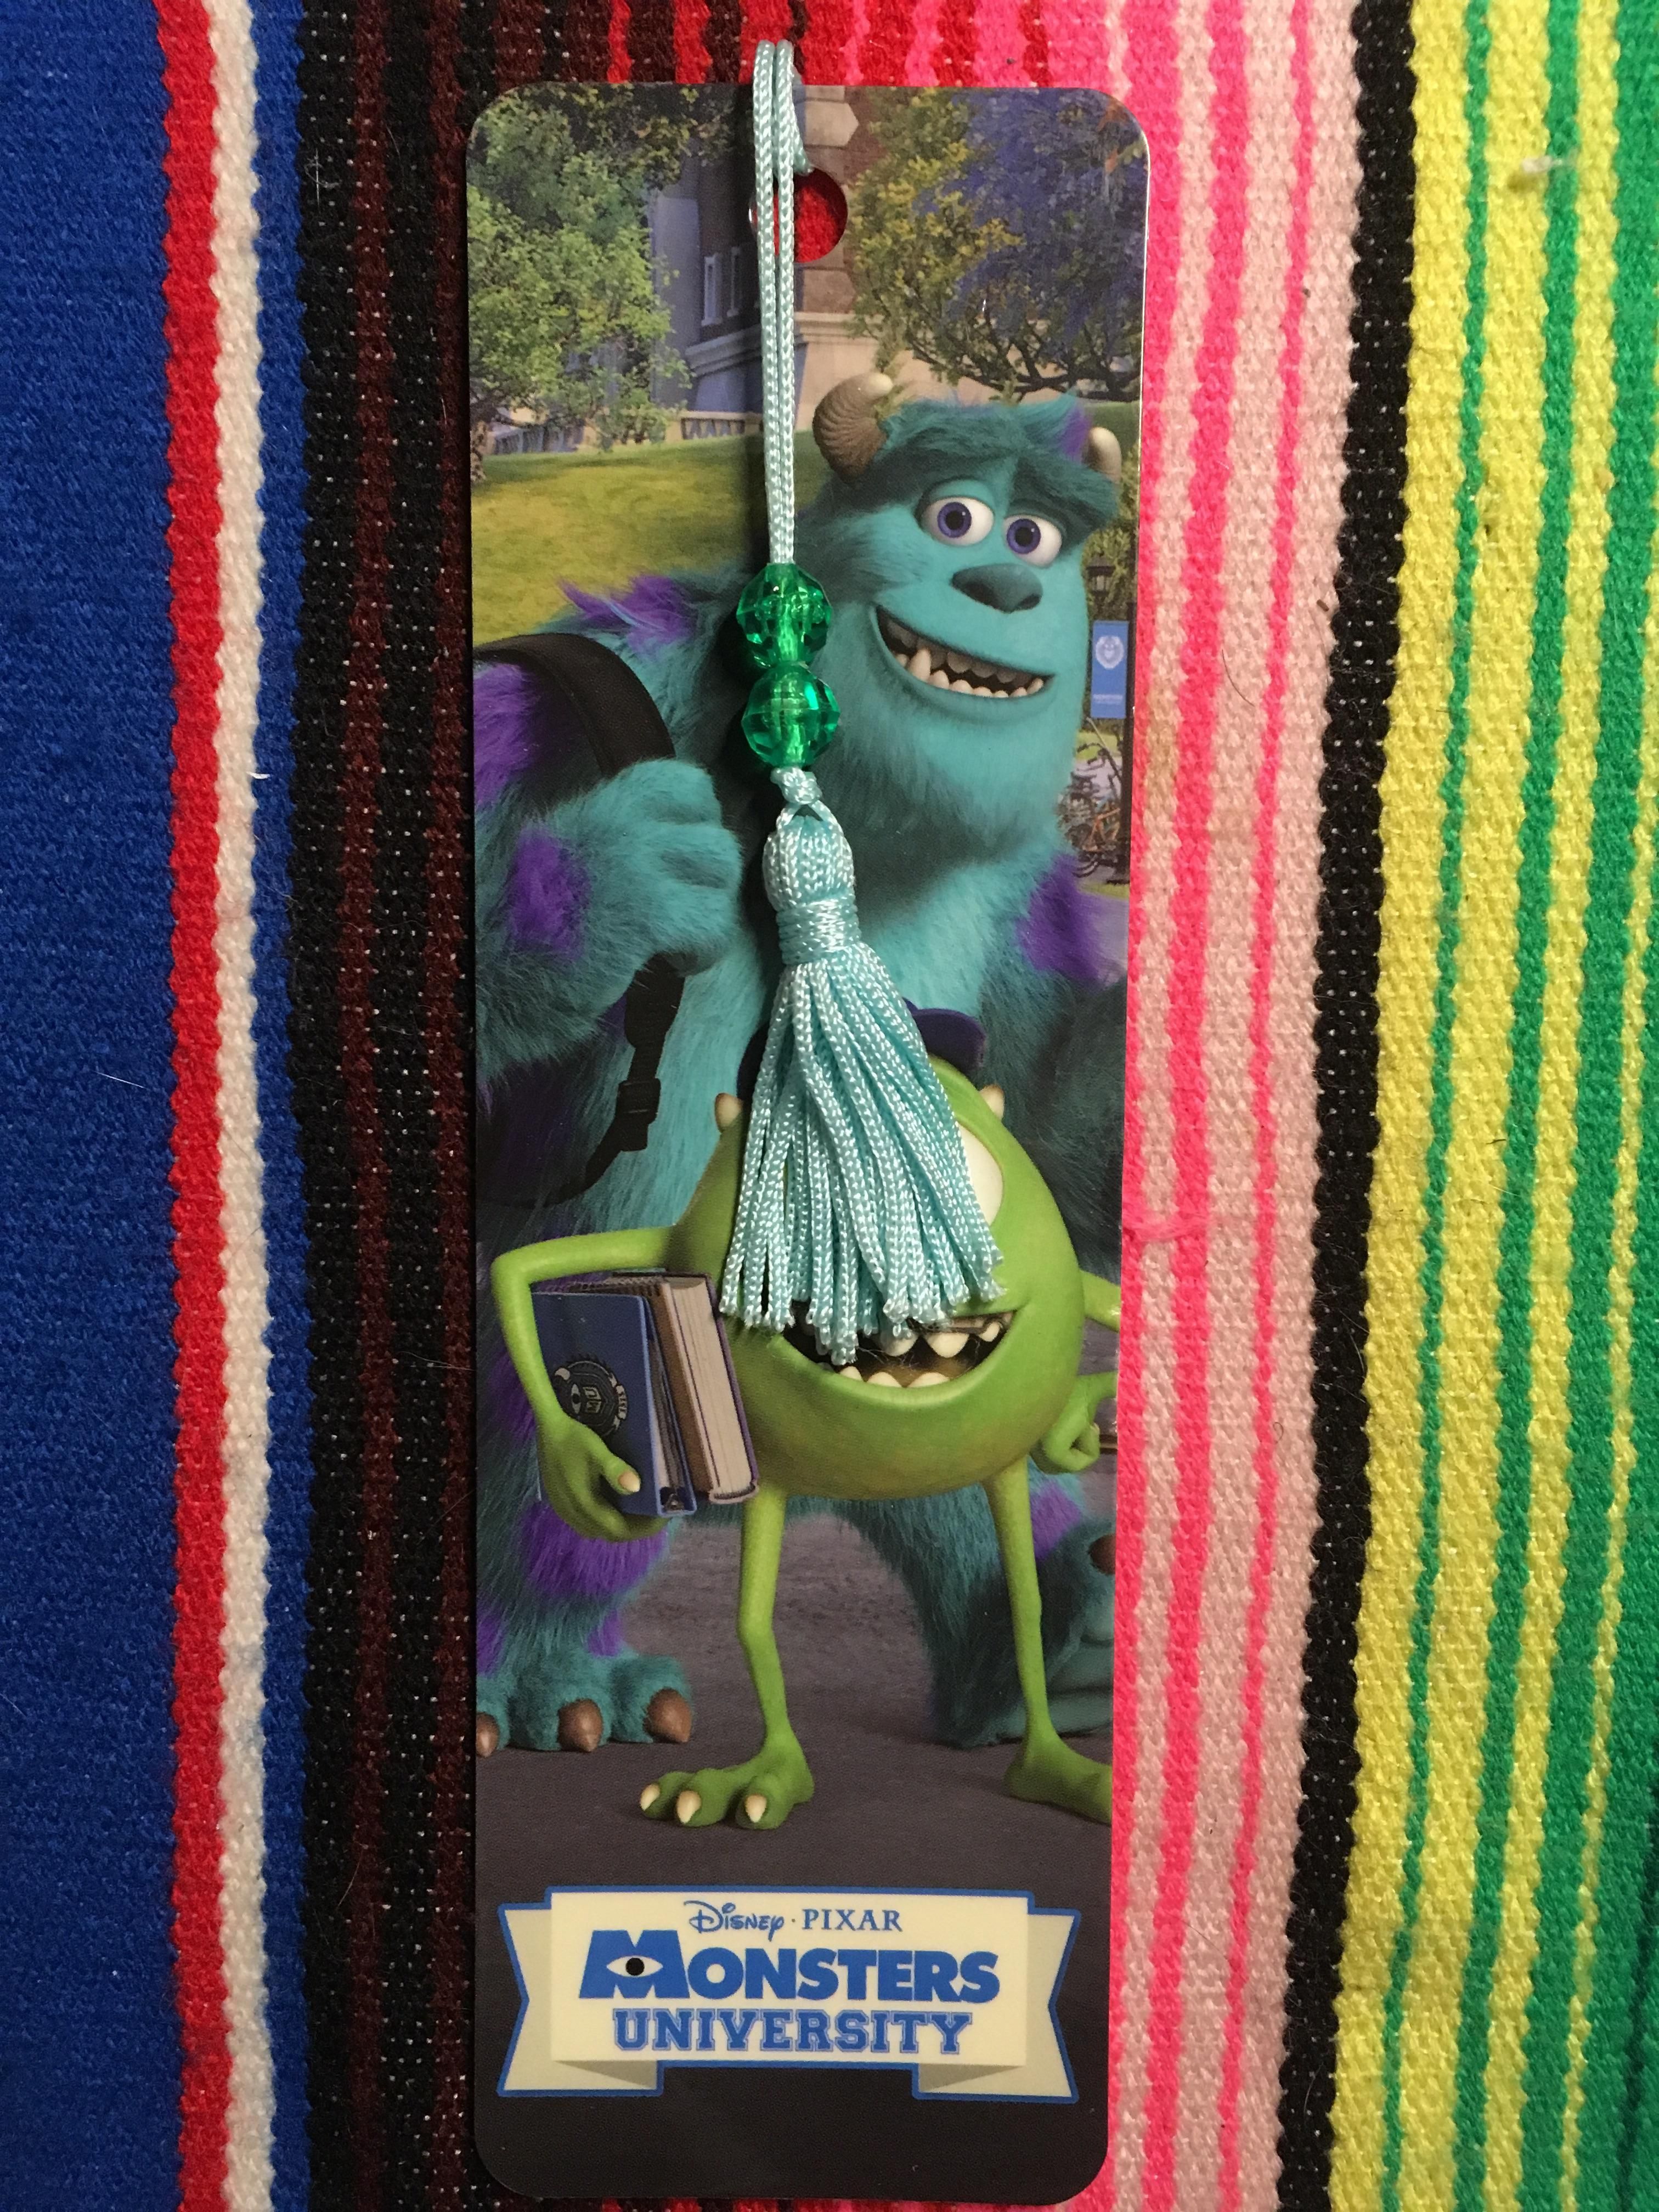 "I can't believe it...I'm on a bookmark!"